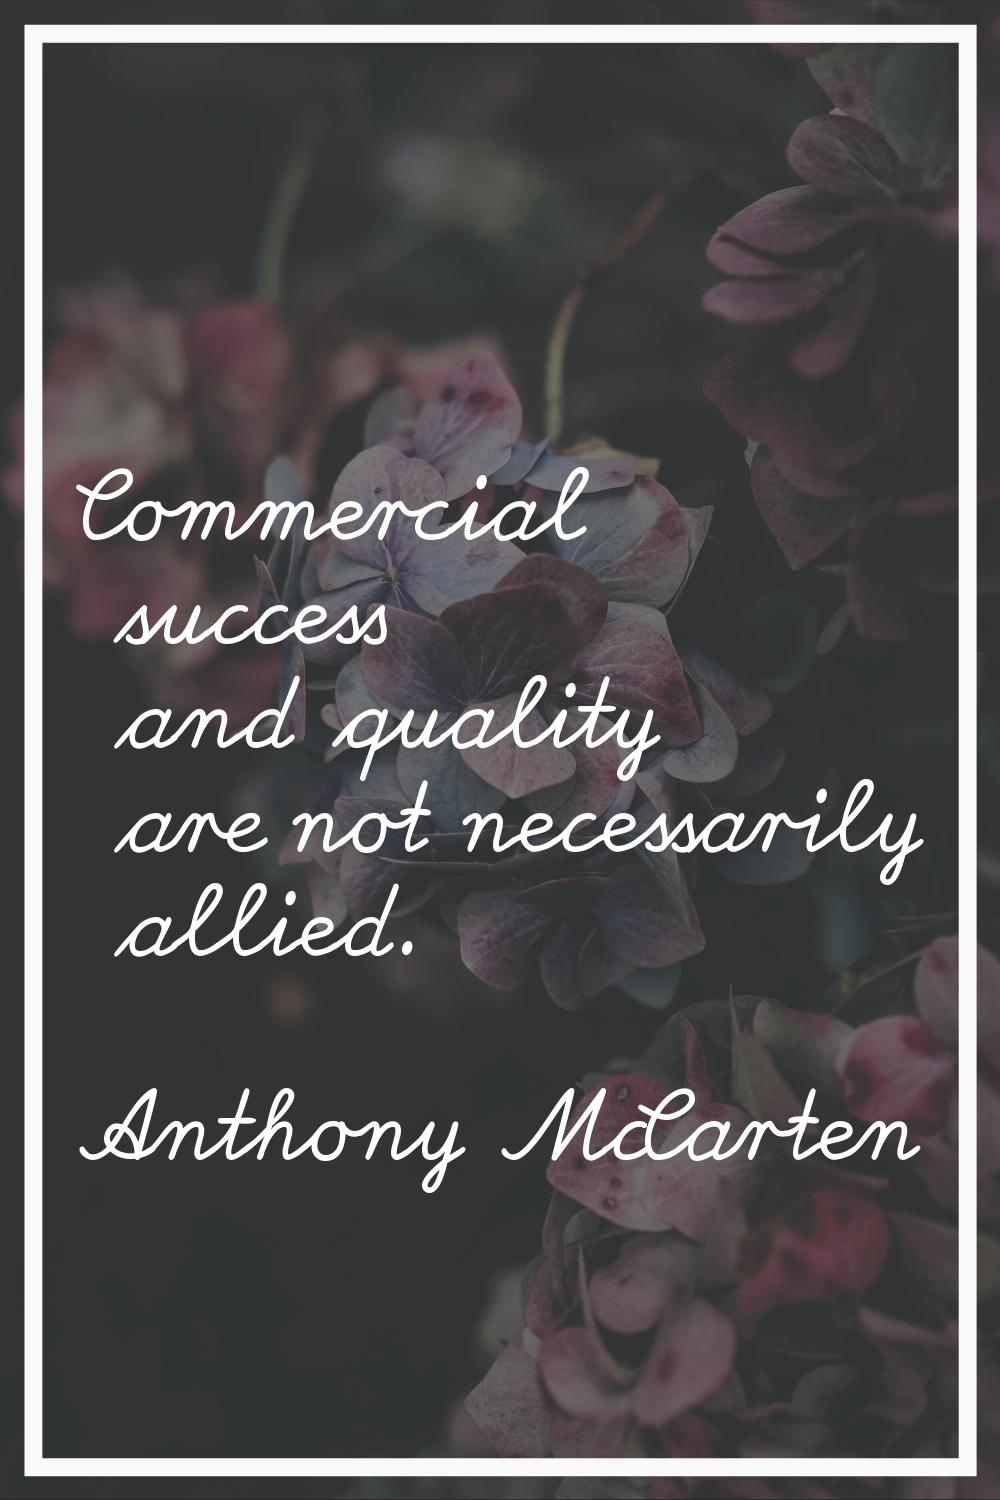 Commercial success and quality are not necessarily allied.